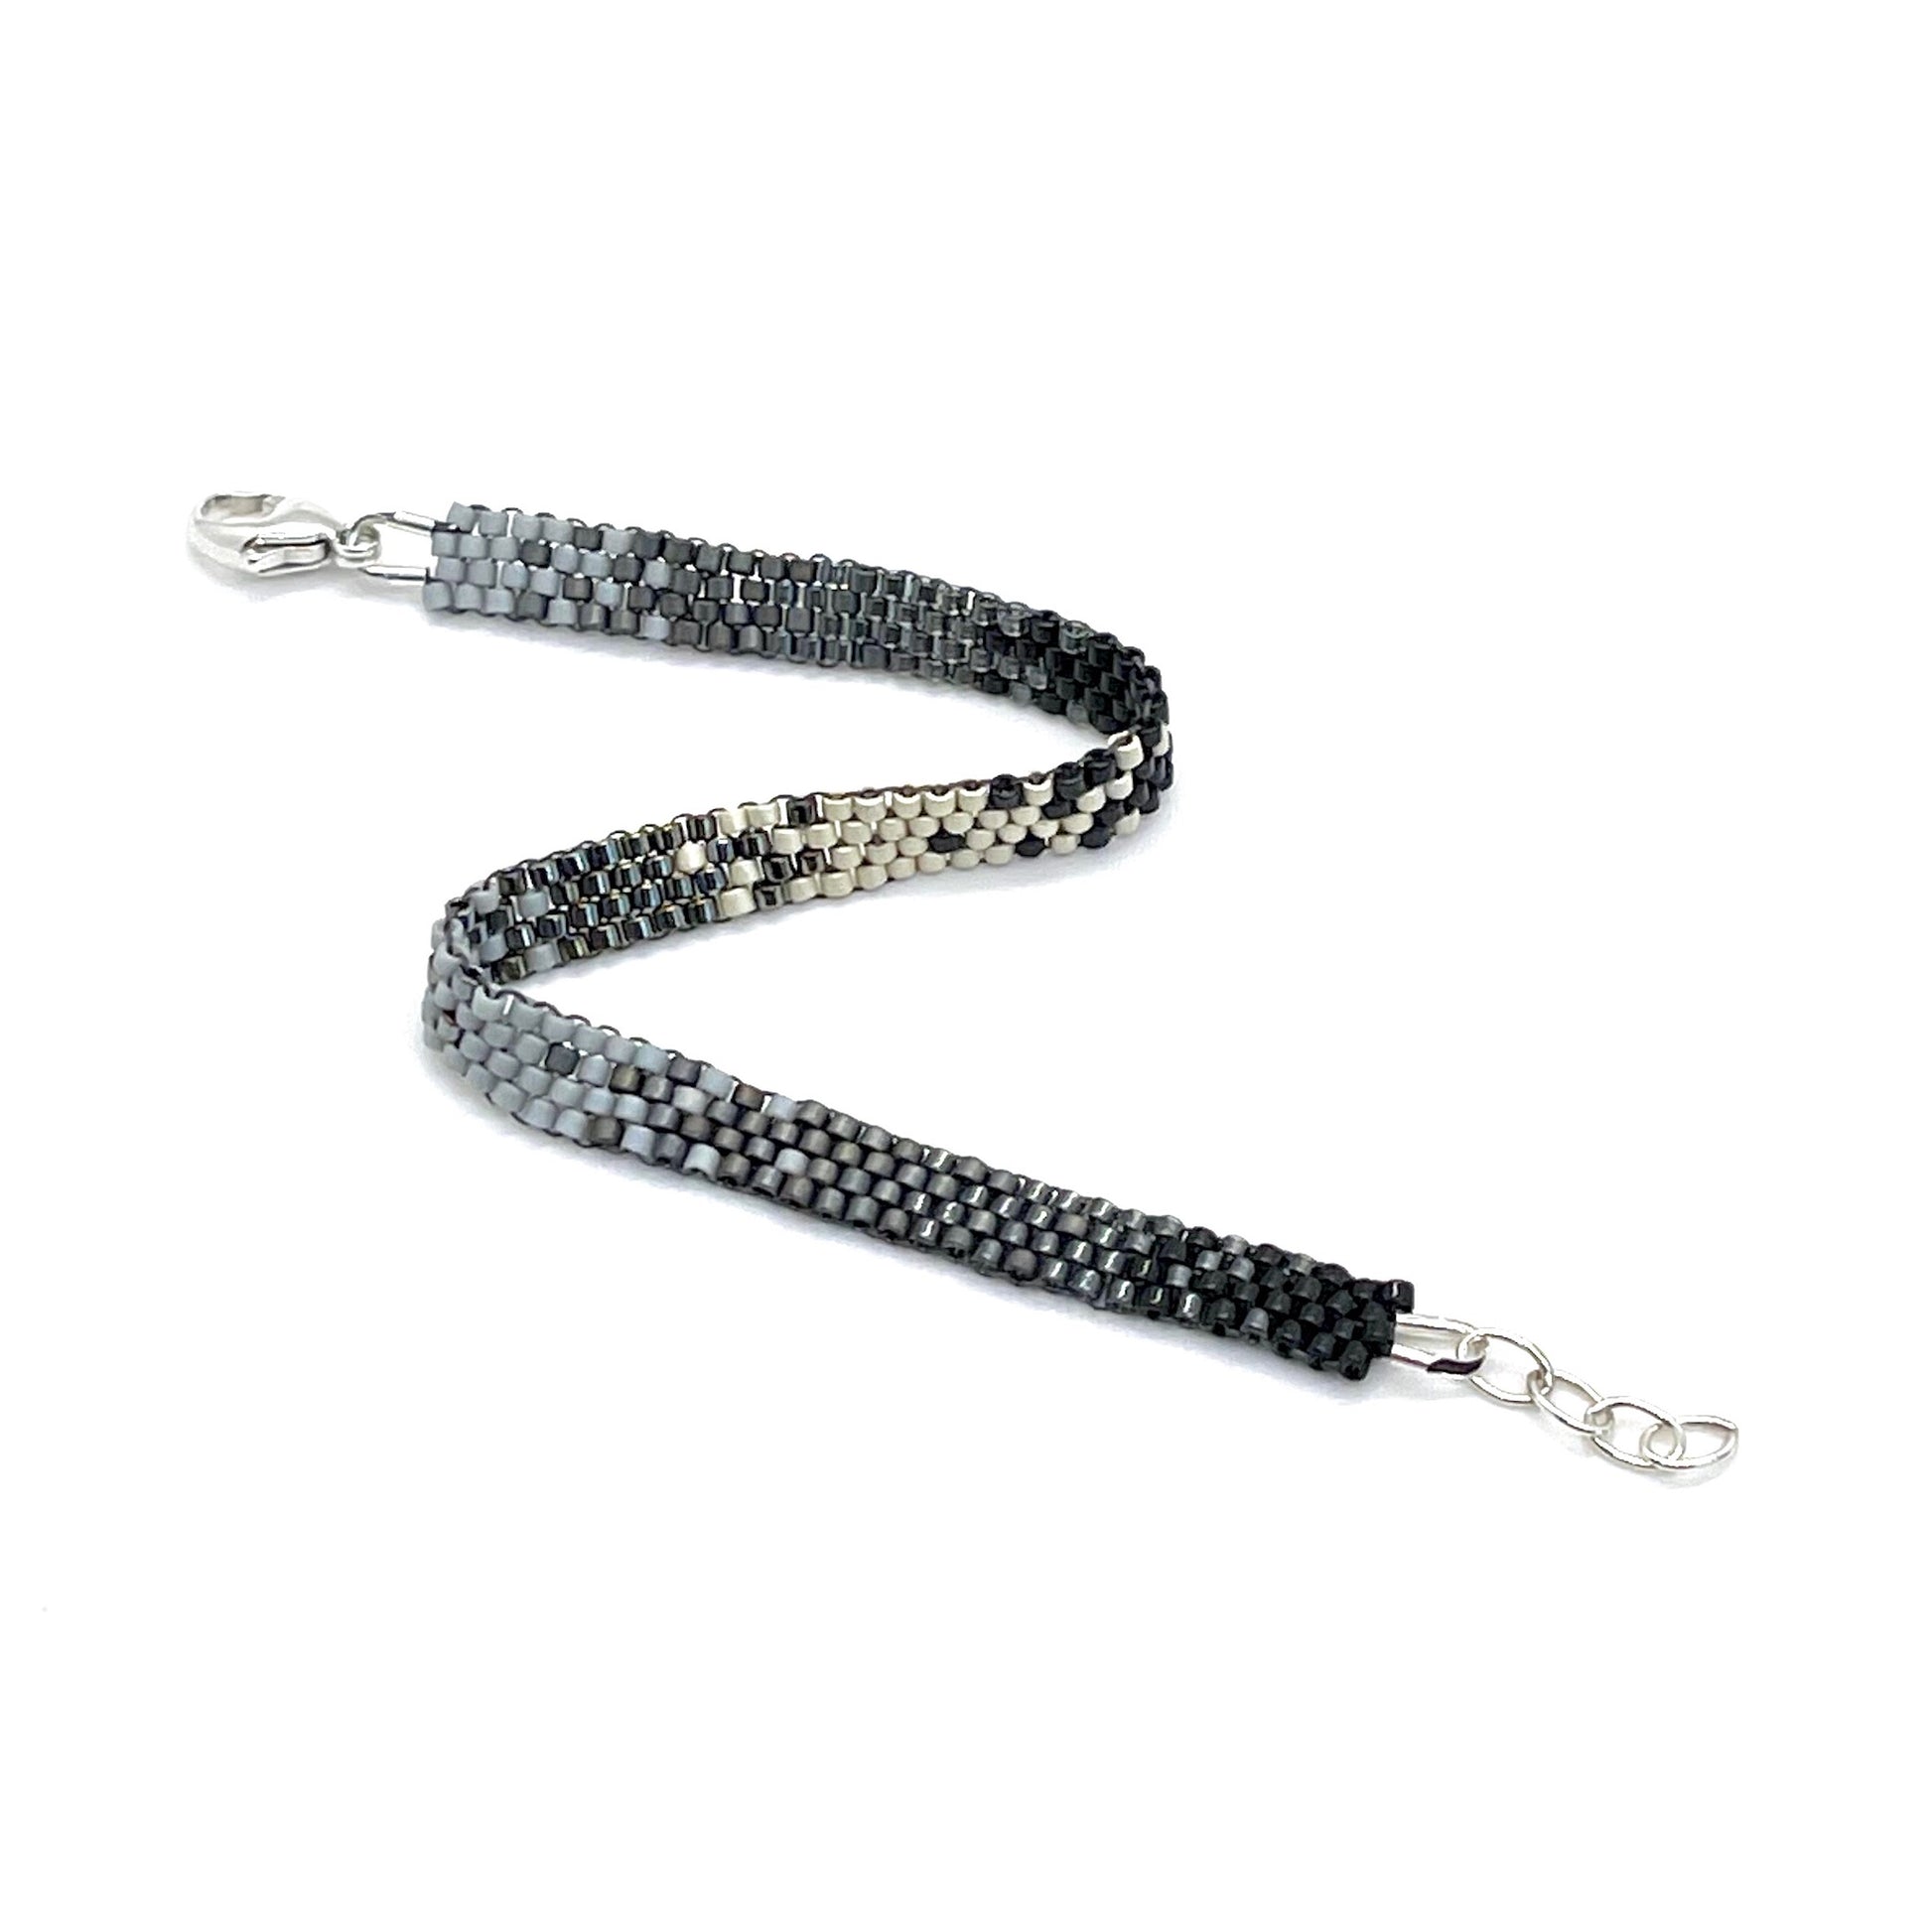 Gray and black ombre beaded flat woven bracelet with seed beads and a sterling silver lobster clasp.